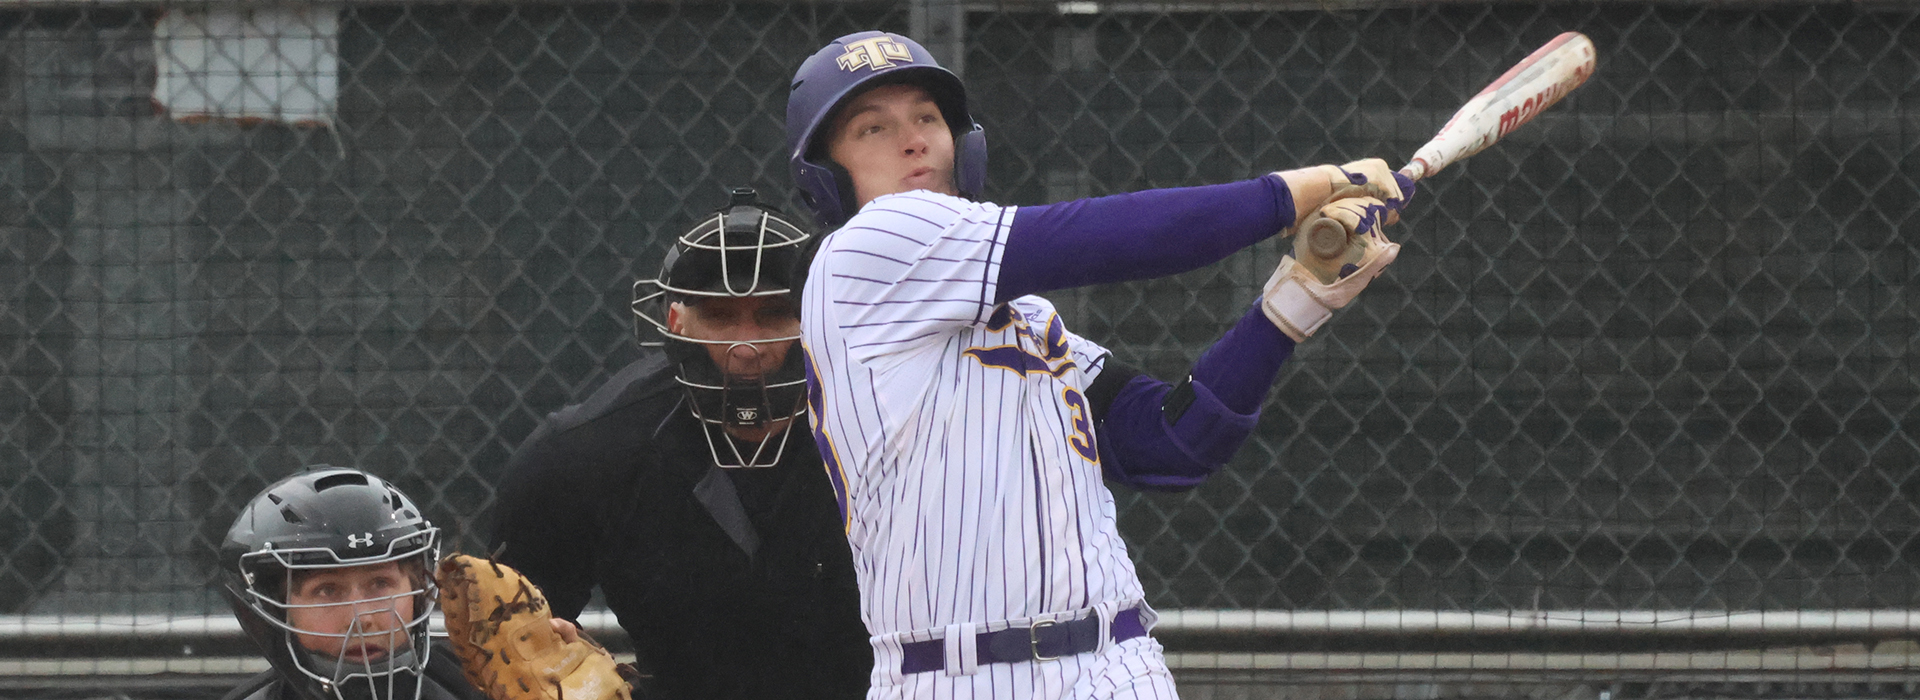 Golden Eagles fall in series finale as Redhawks rally in eighth